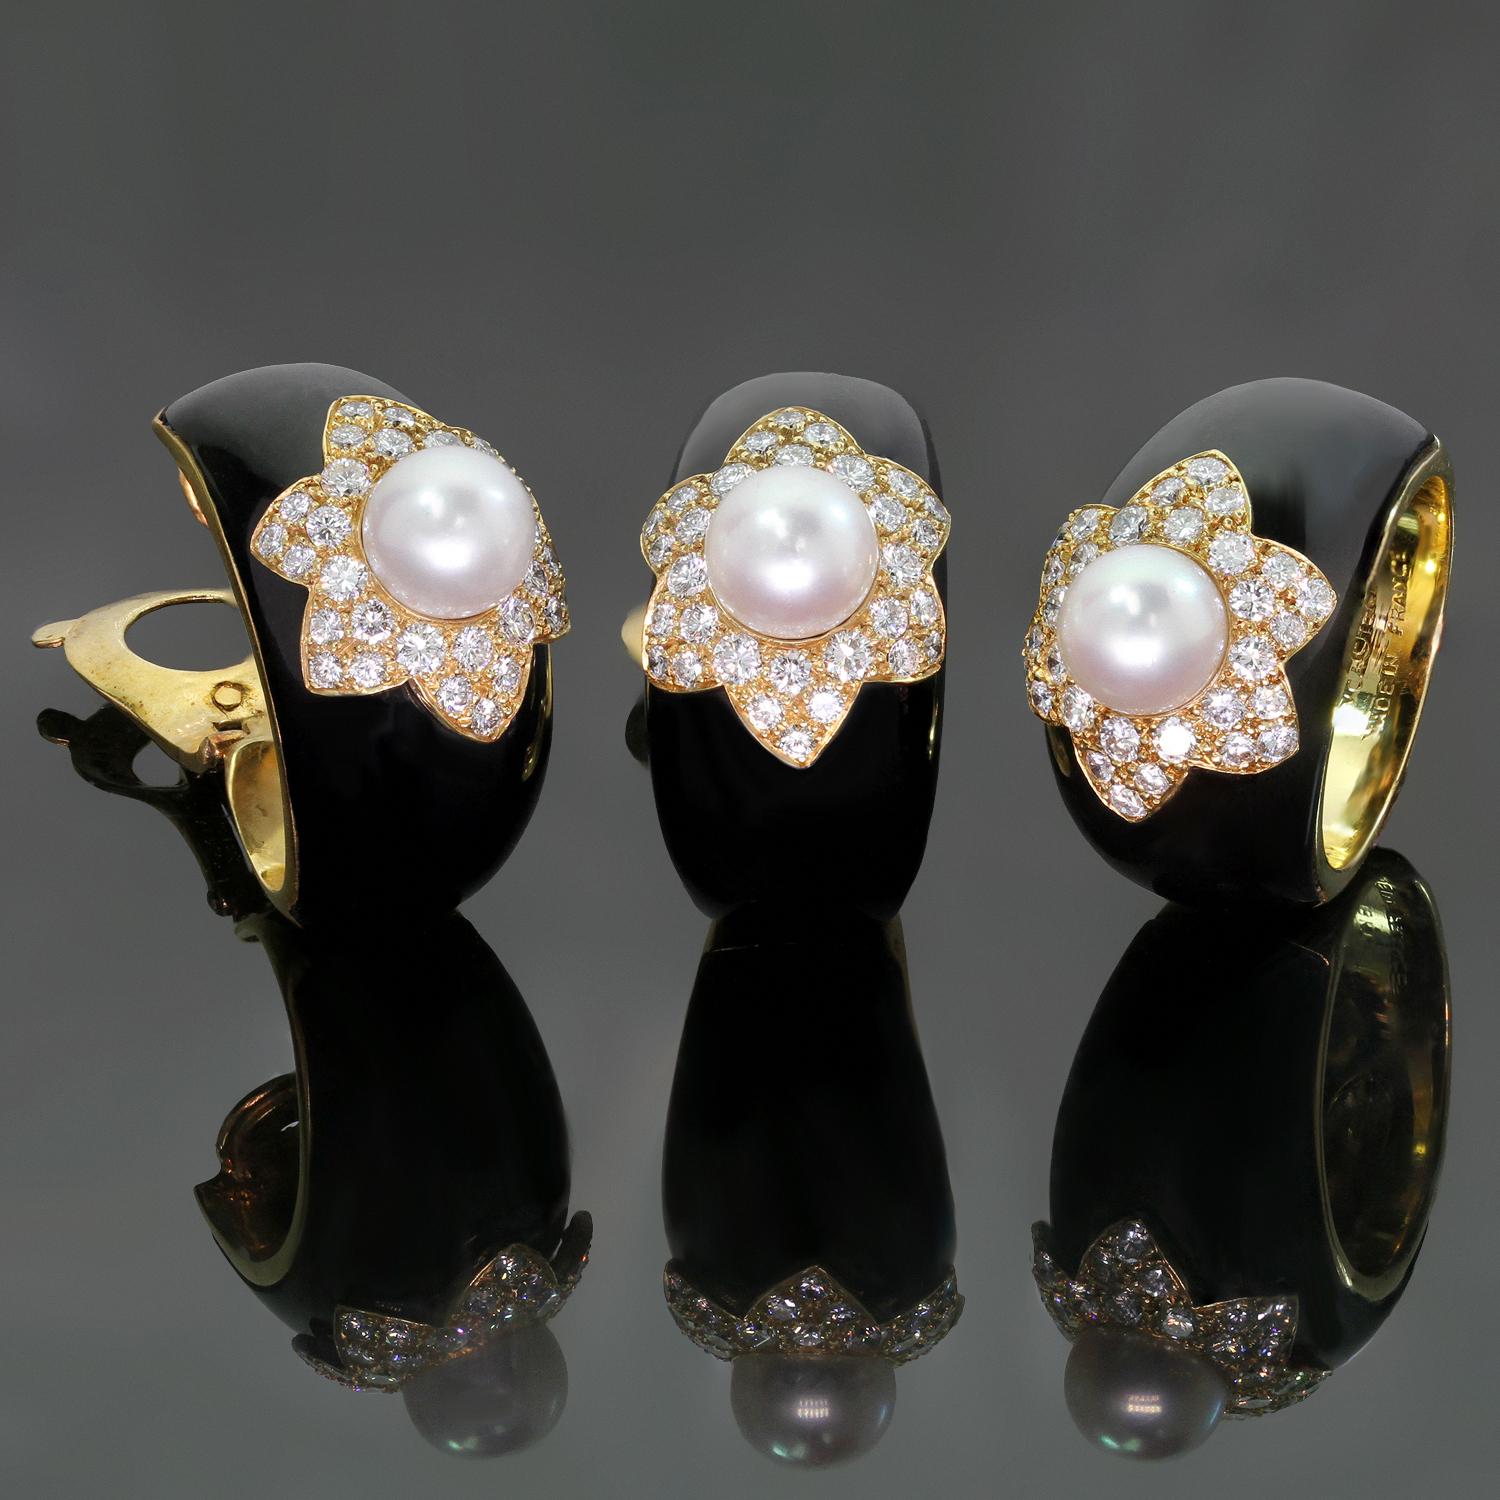 This spectacular Van Cleef & Arpels earrings & ring set are crafted in 18k yellow fold, inlaid with black onyx with 7.0mm cultured pearls in the center - white, clean, and very shiny, surrounded by a floral pave of brilliant-cut round D-F VVS1-VVS2